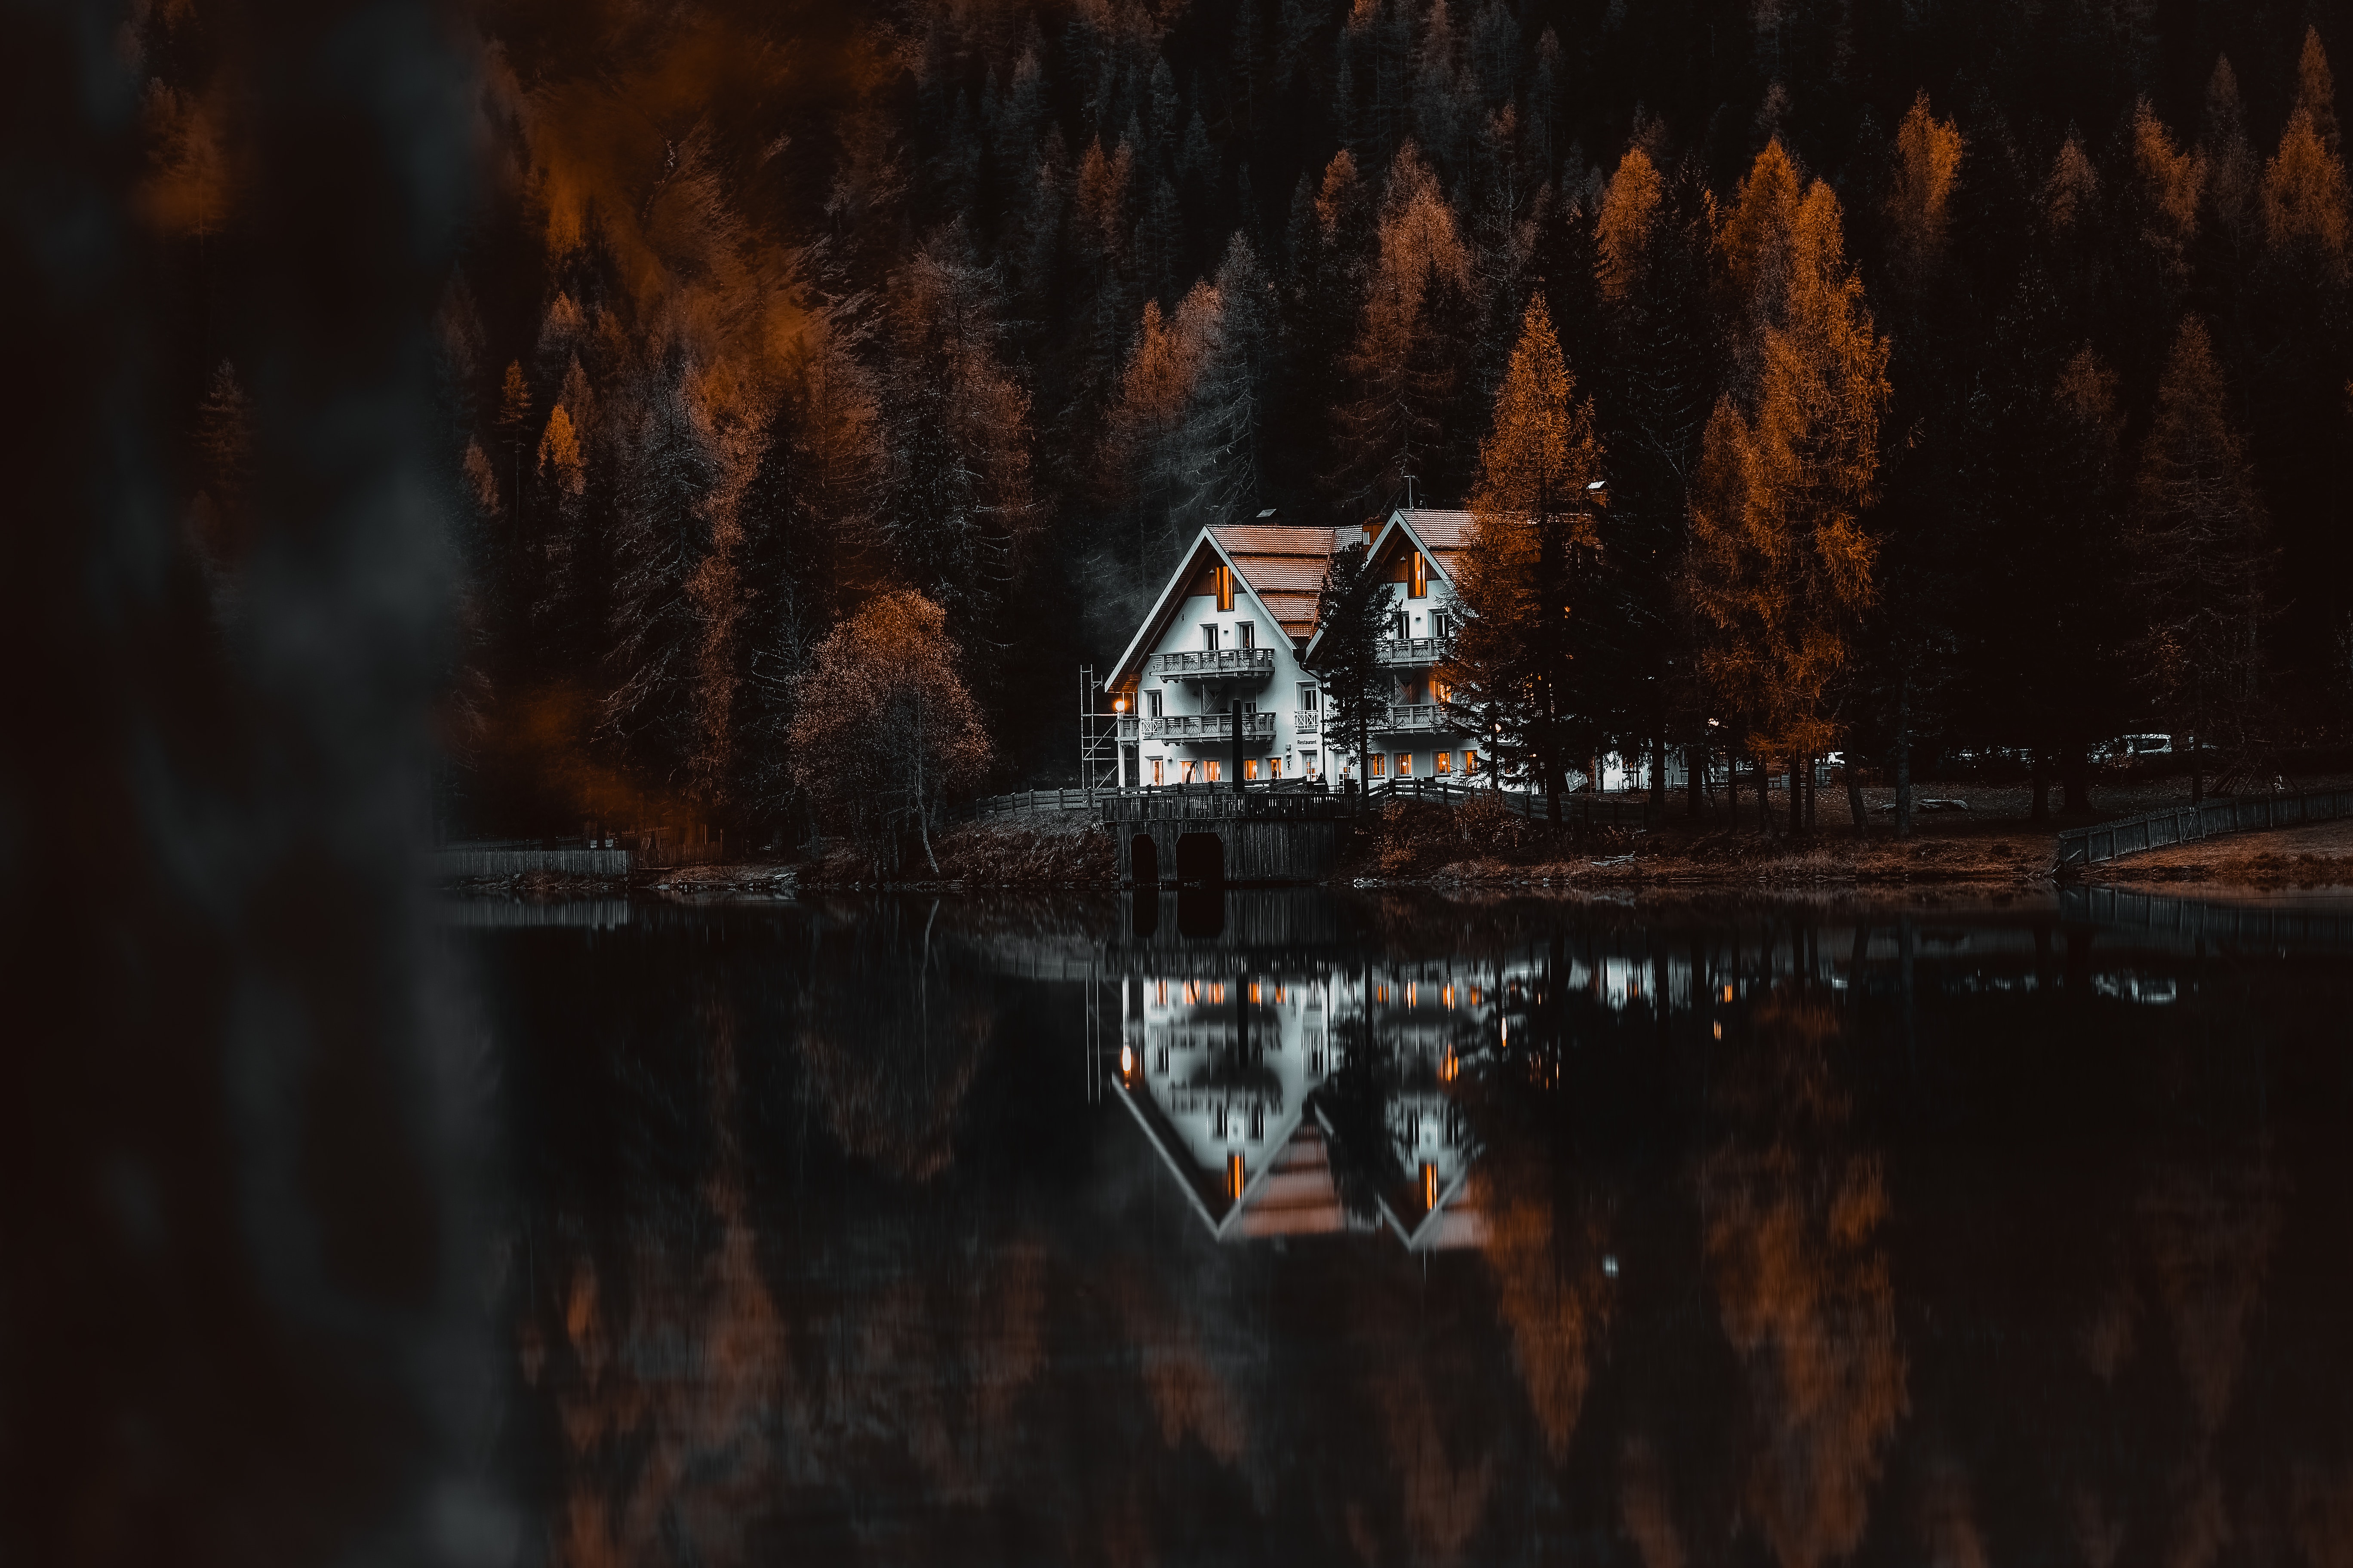 lake, houses, shore, small houses, forest, nature, bank cellphone